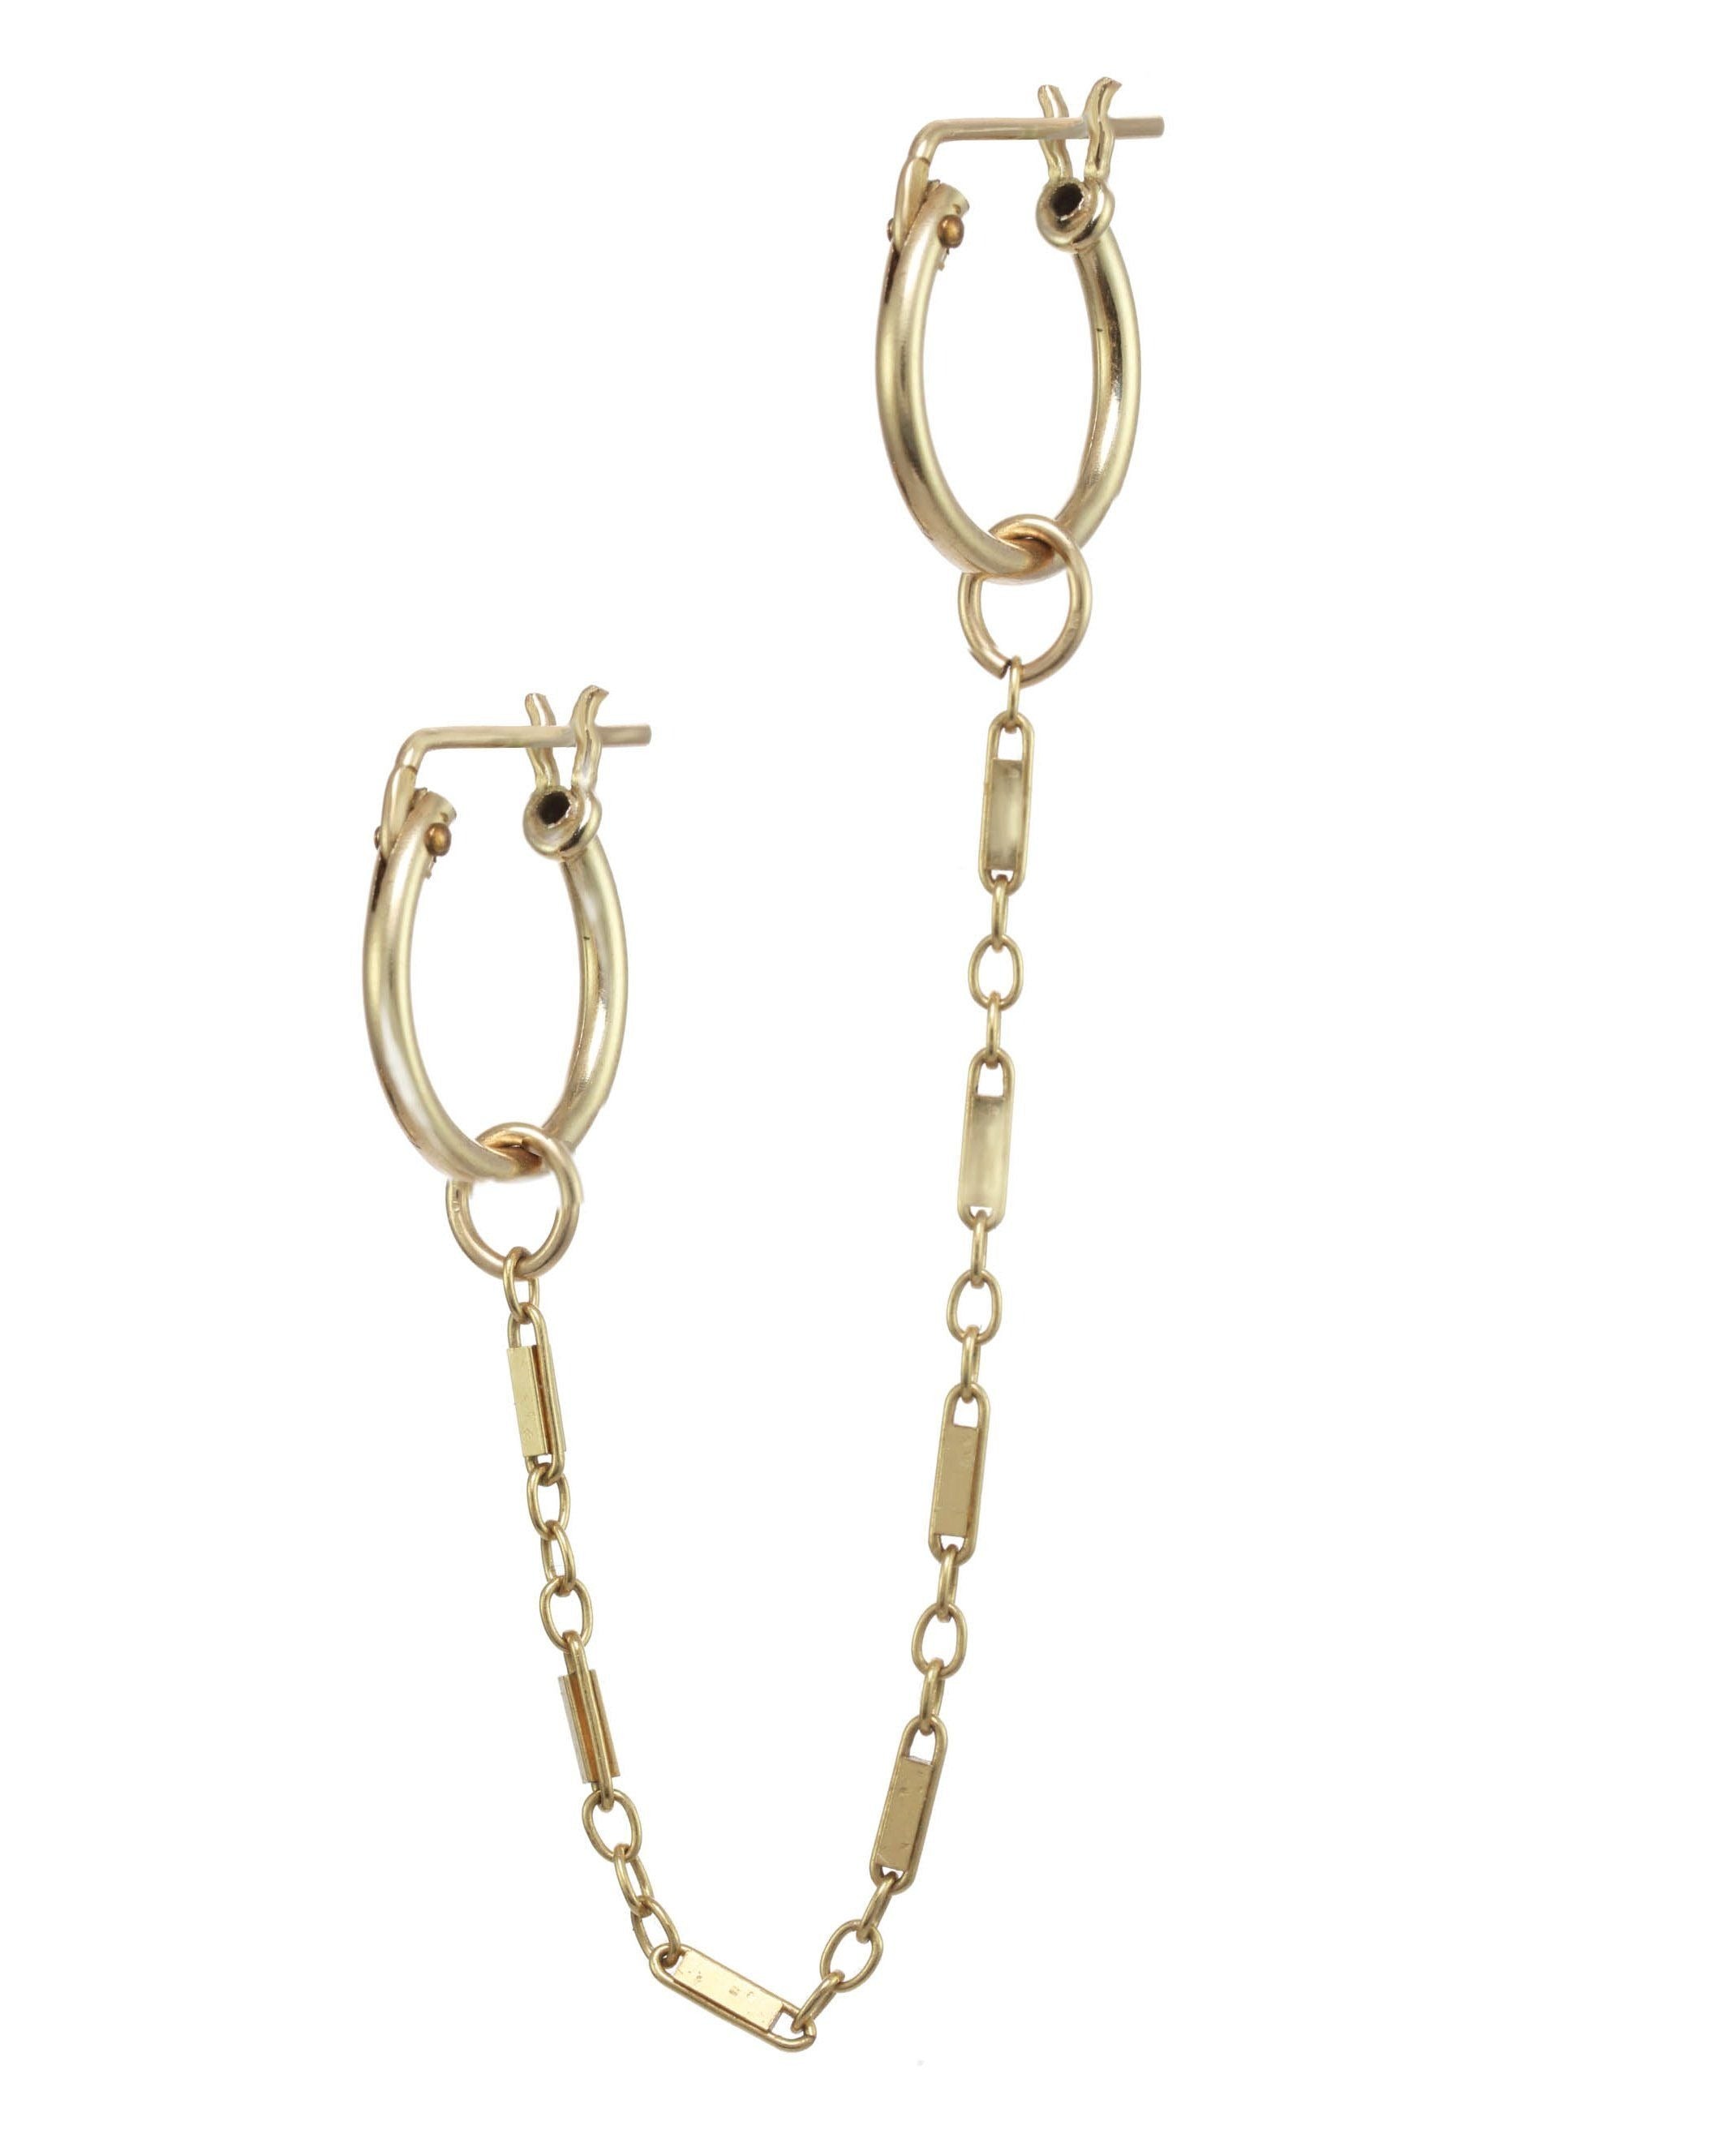 Quinny Chain Hoop by KOZAKH. A climber style earring for 2 piercings, crafted in 14K Gold Filled.